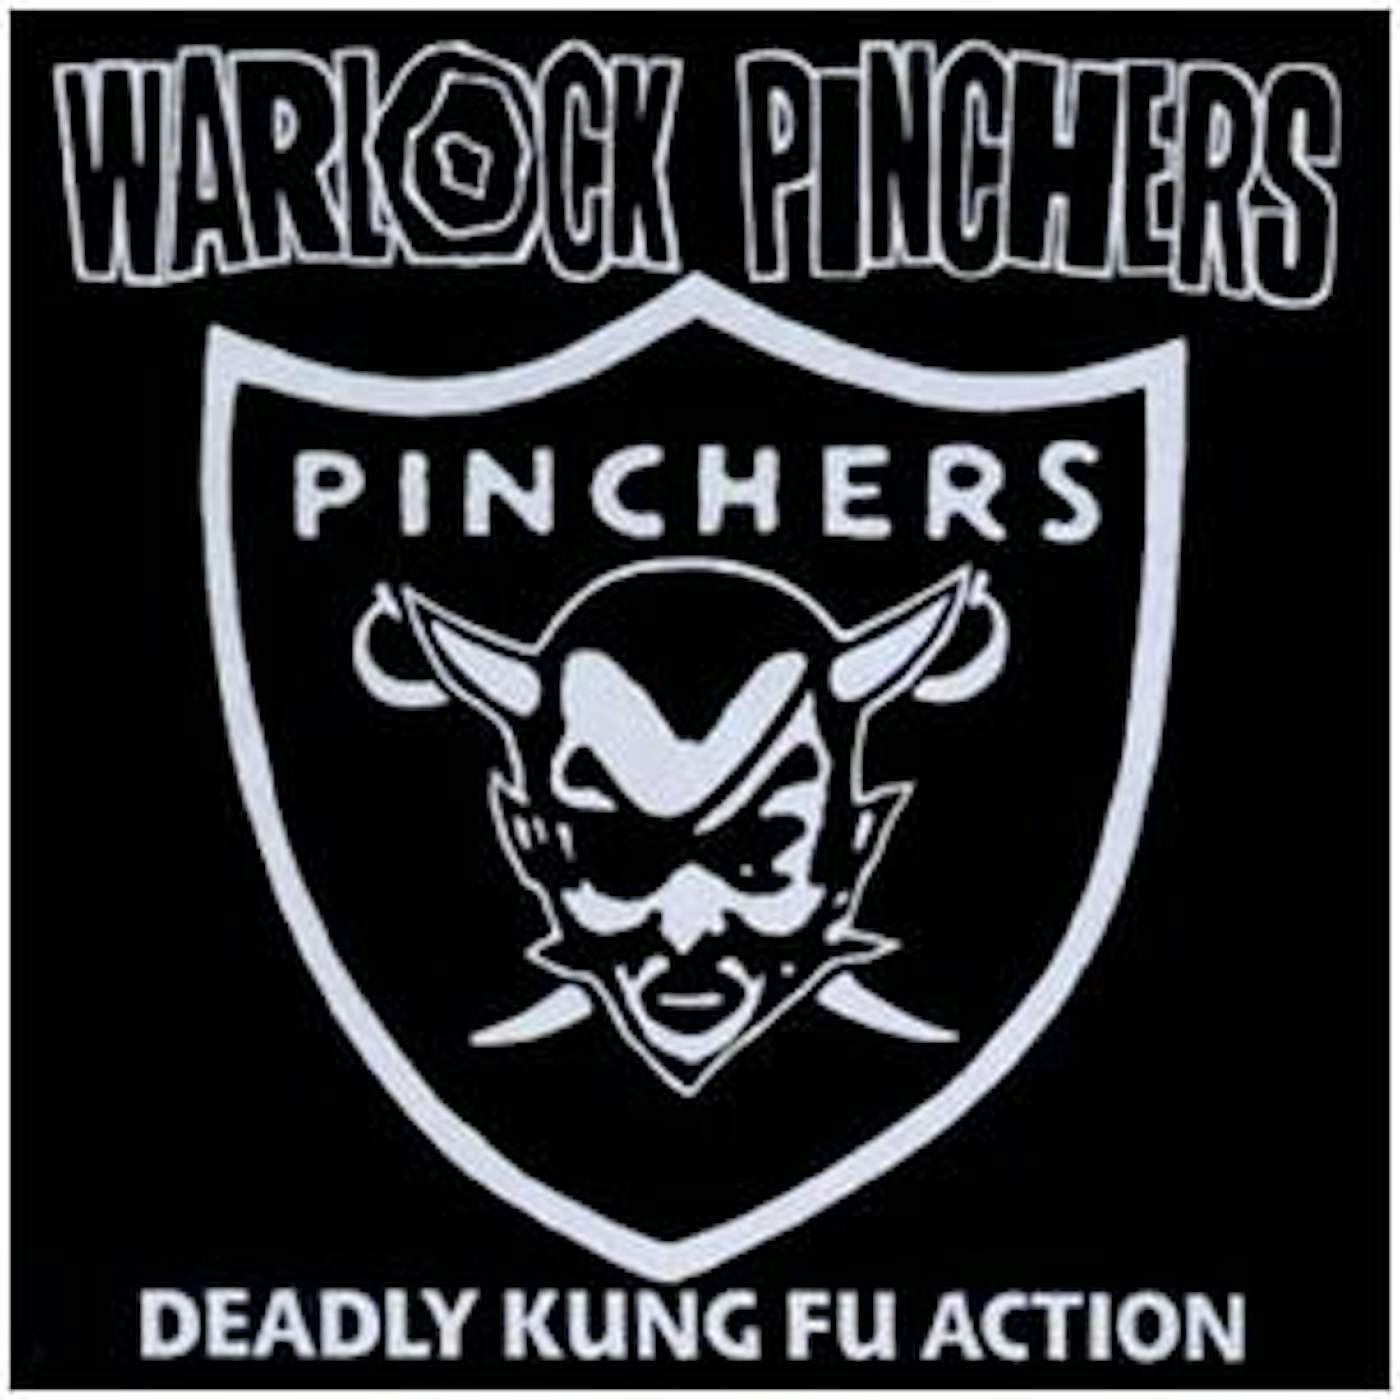 Warlock Pinchers DEADLY KUNG FU ACTION CD